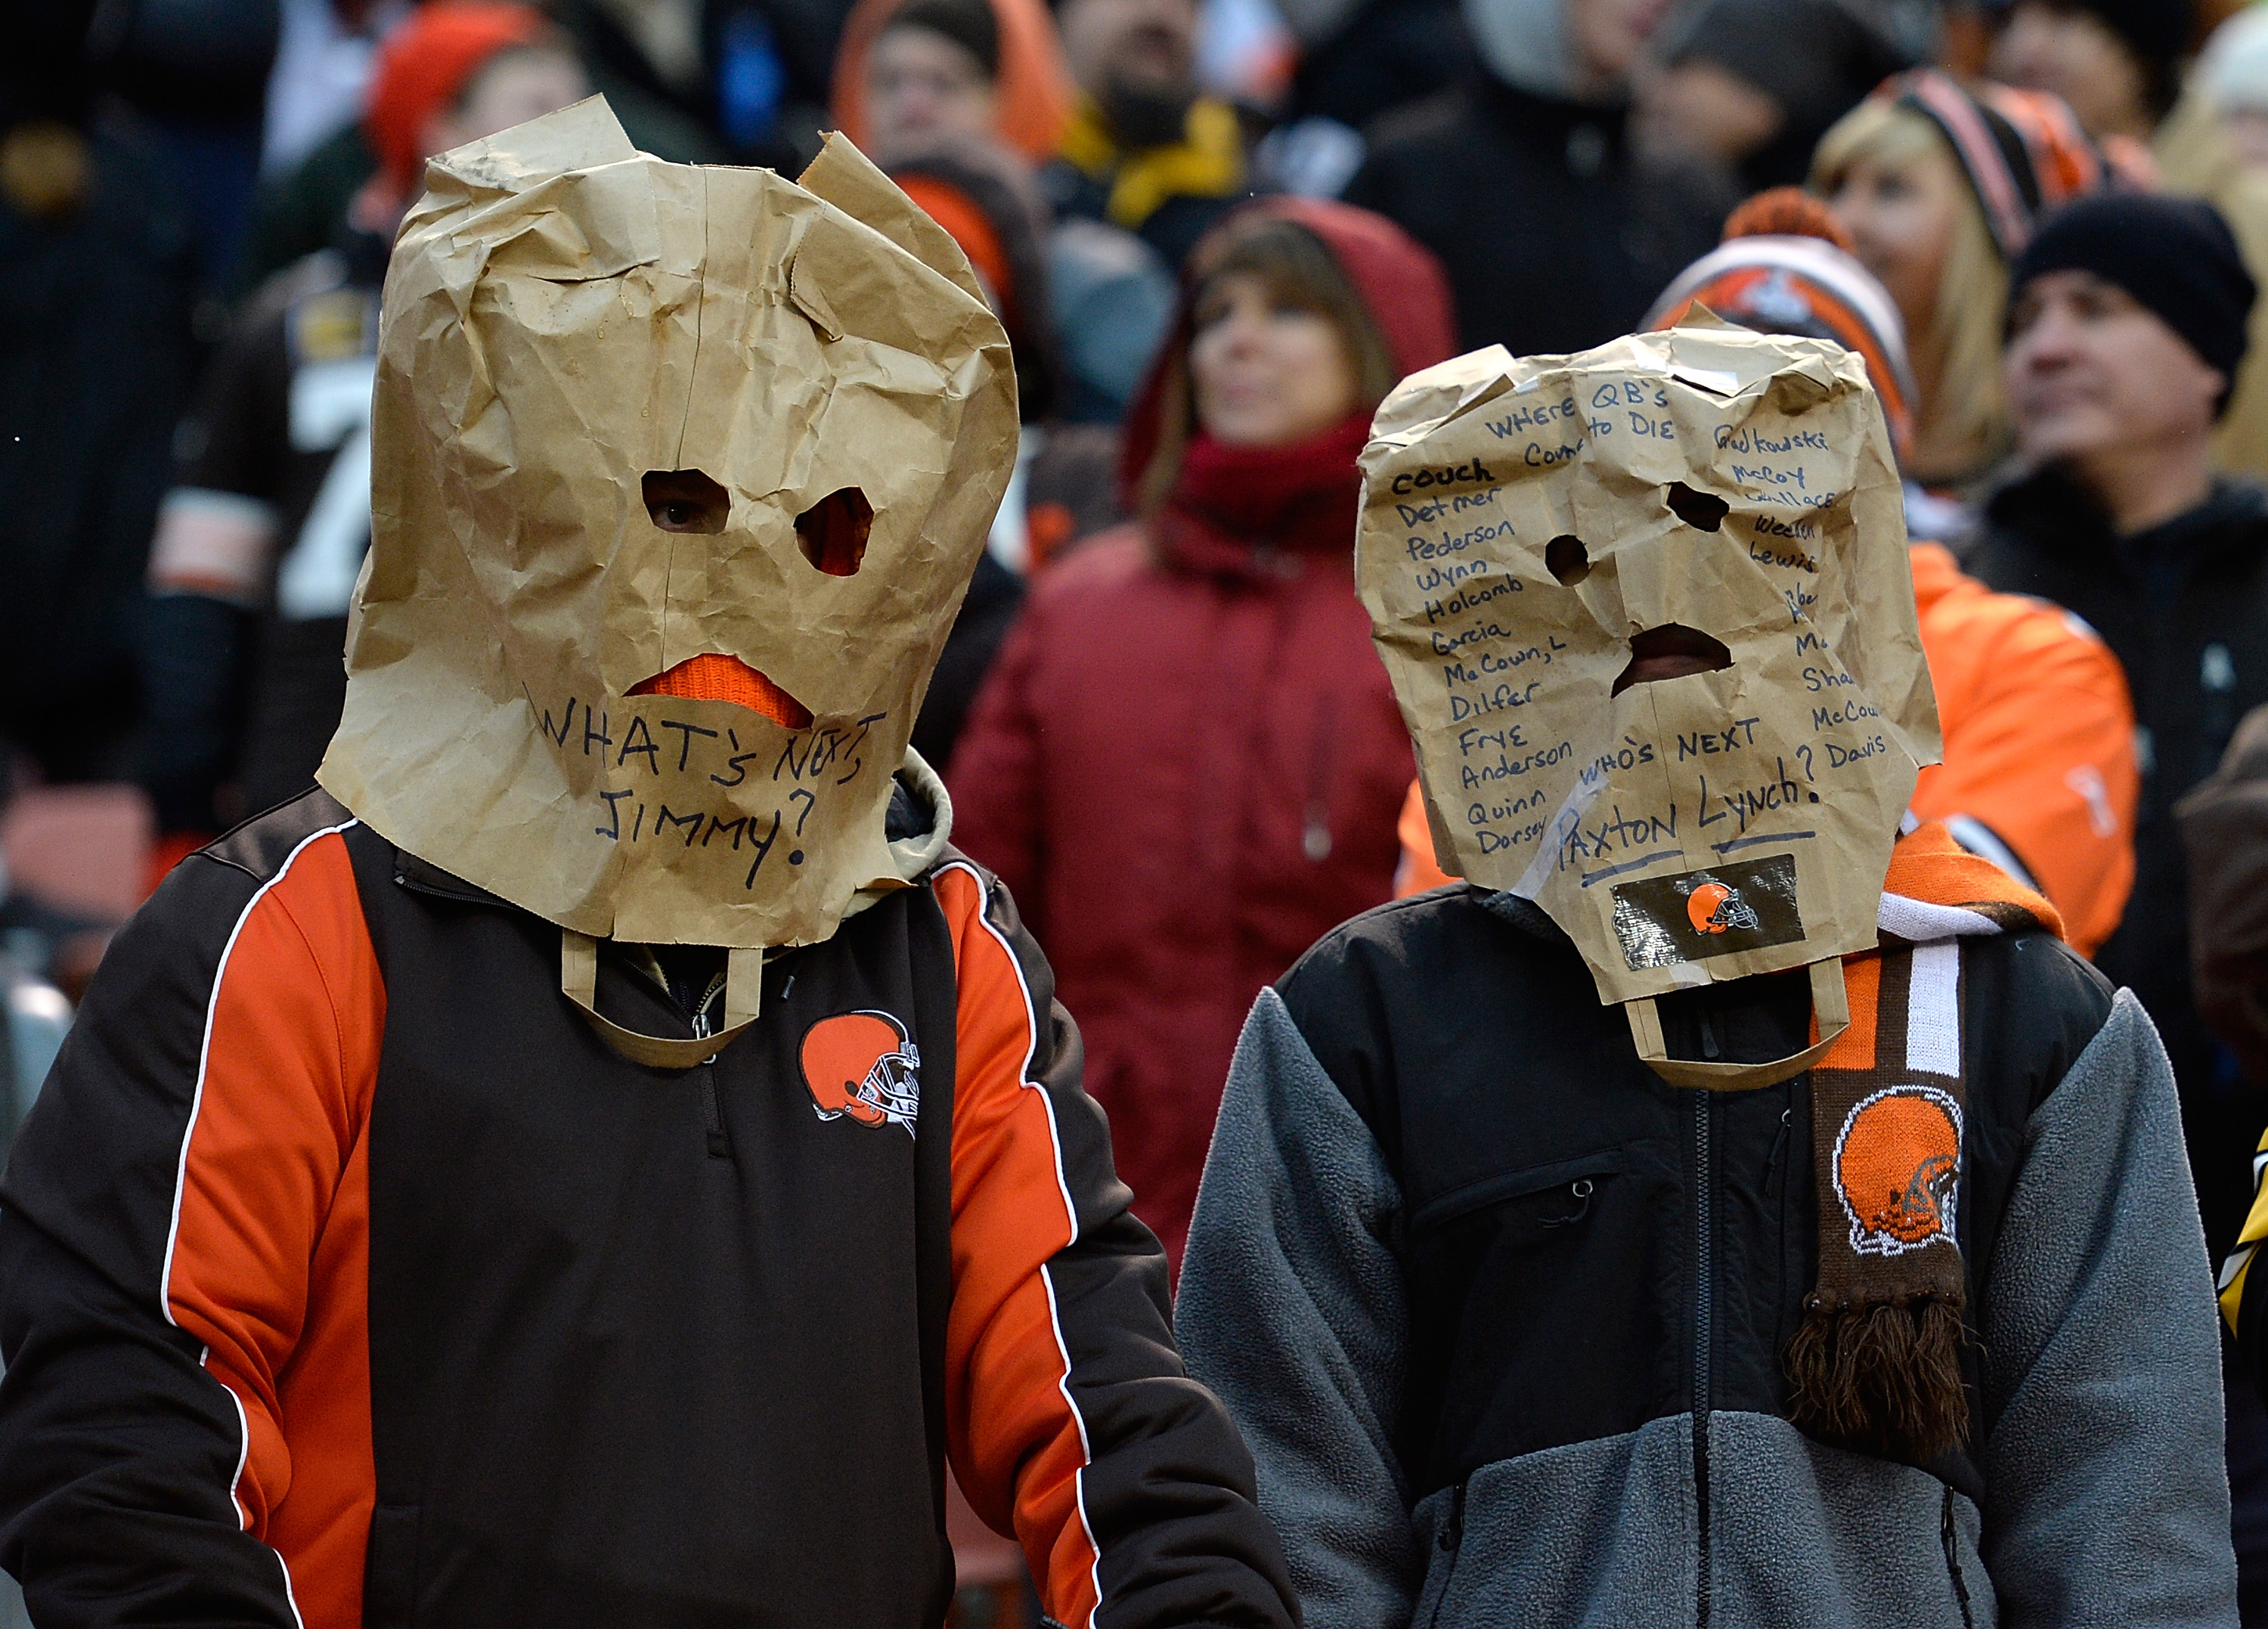 cleveland browns tickets today